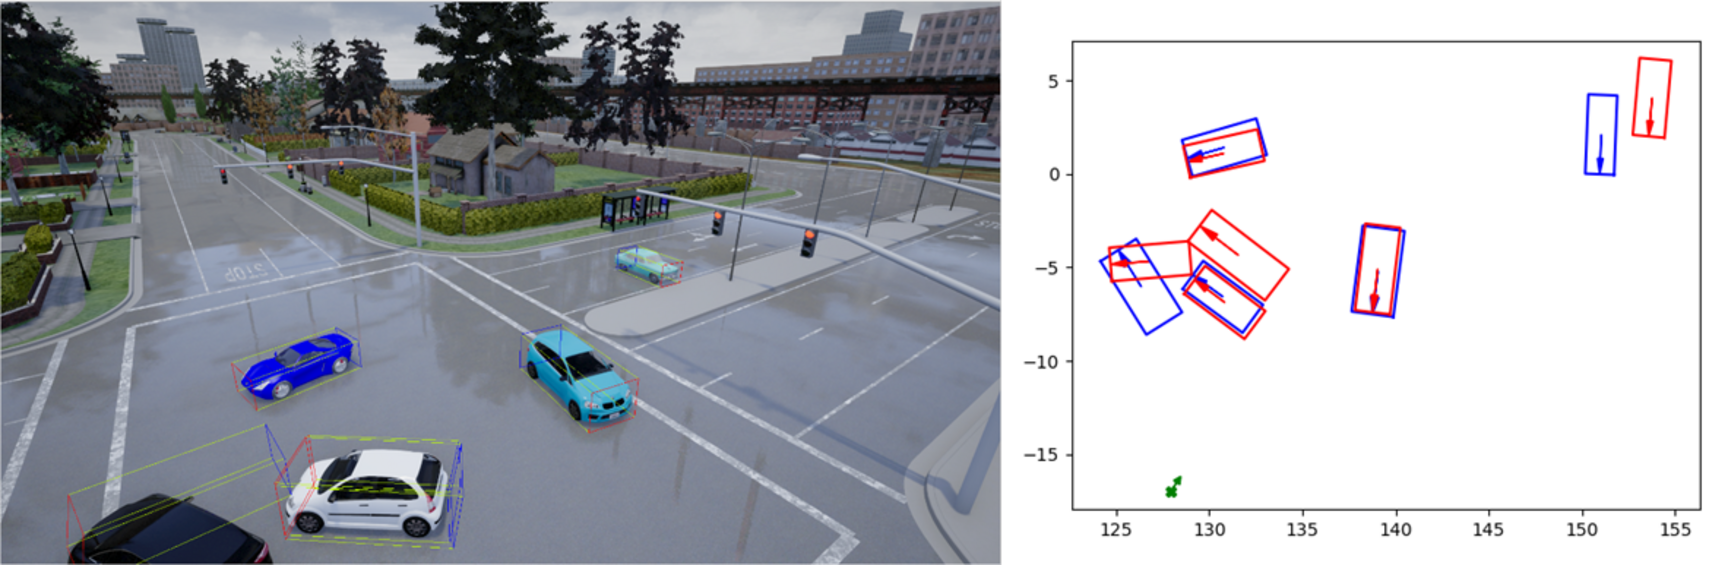 3D pose estimation on synthetic data, with bird view detections on the right (blue: ground truth, red: estimated pose).